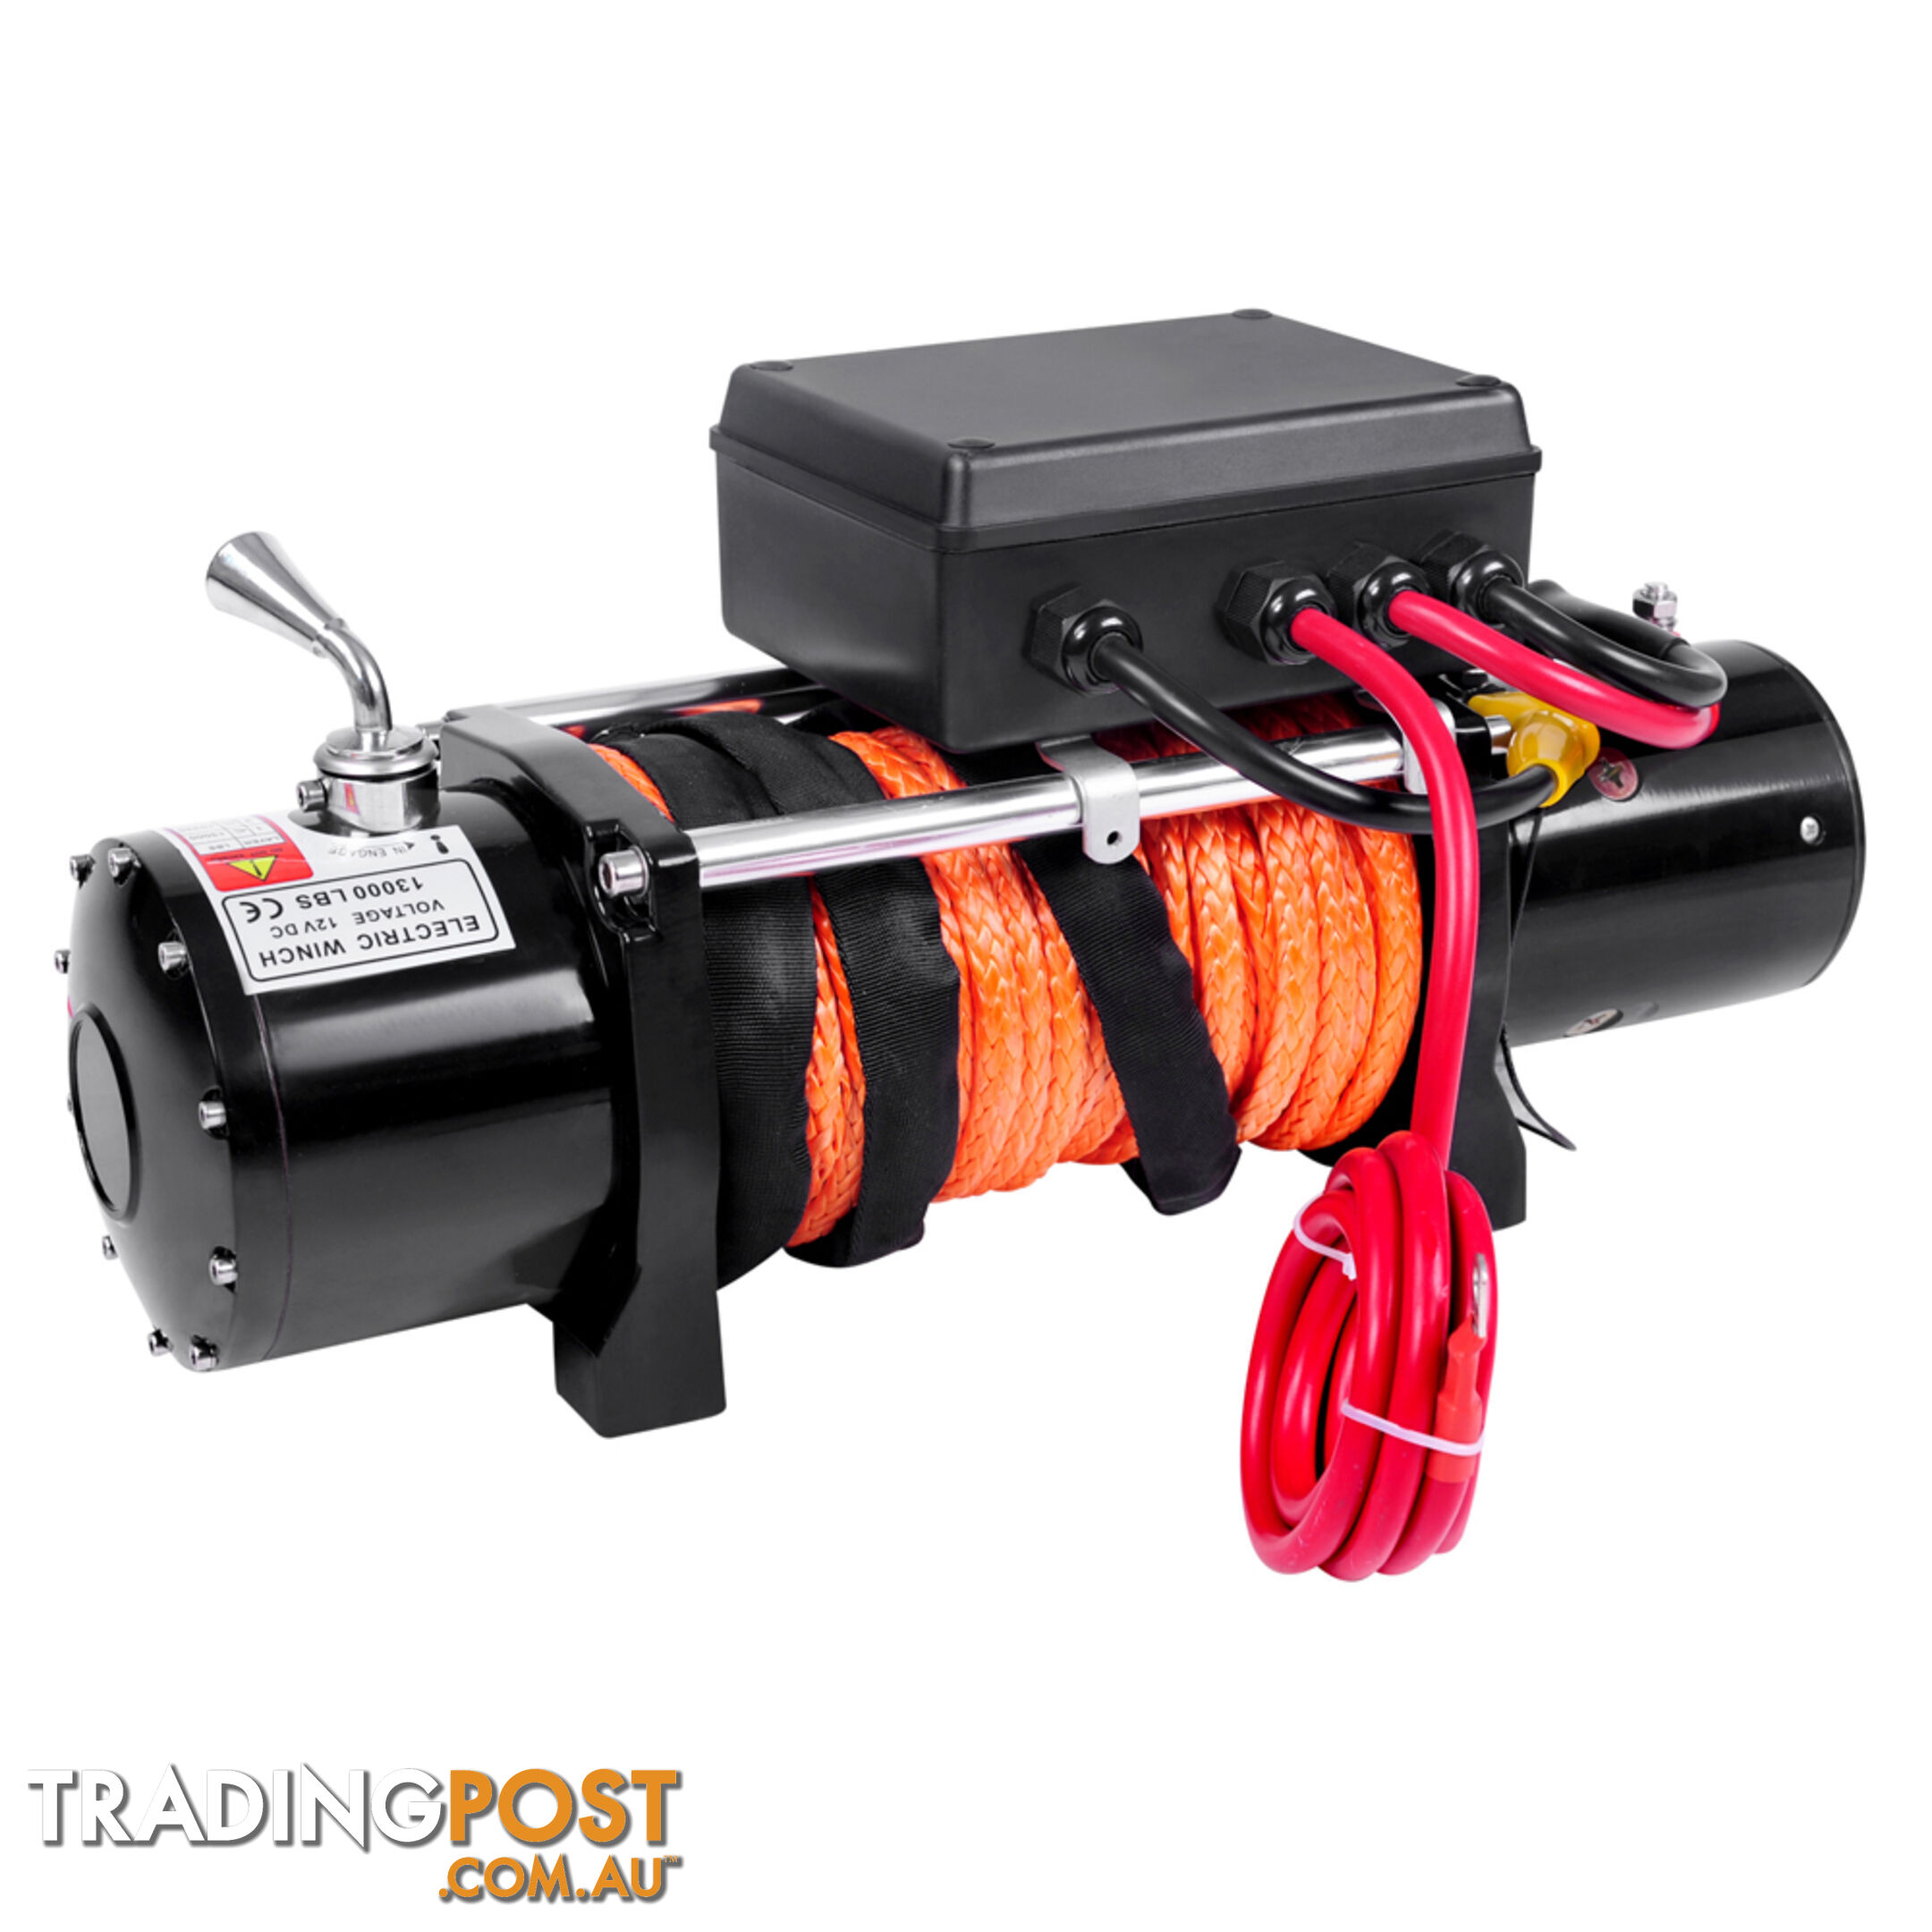 12V 13000 LBS Wireless Synthetic Rope Electric Winch